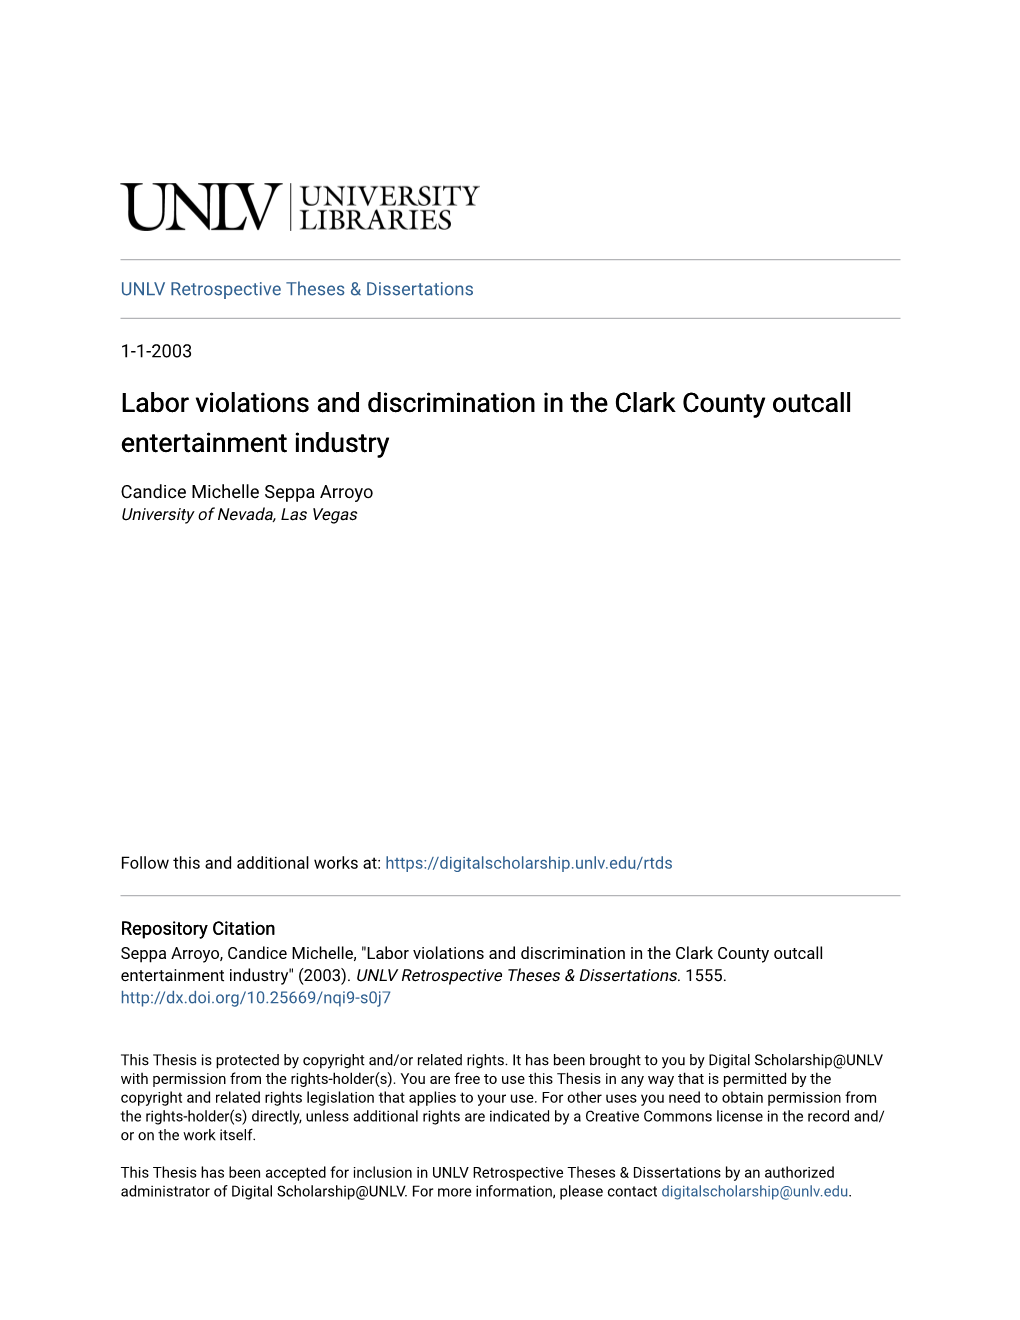 Labor Violations and Discrimination in the Clark County Outcall Entertainment Industry